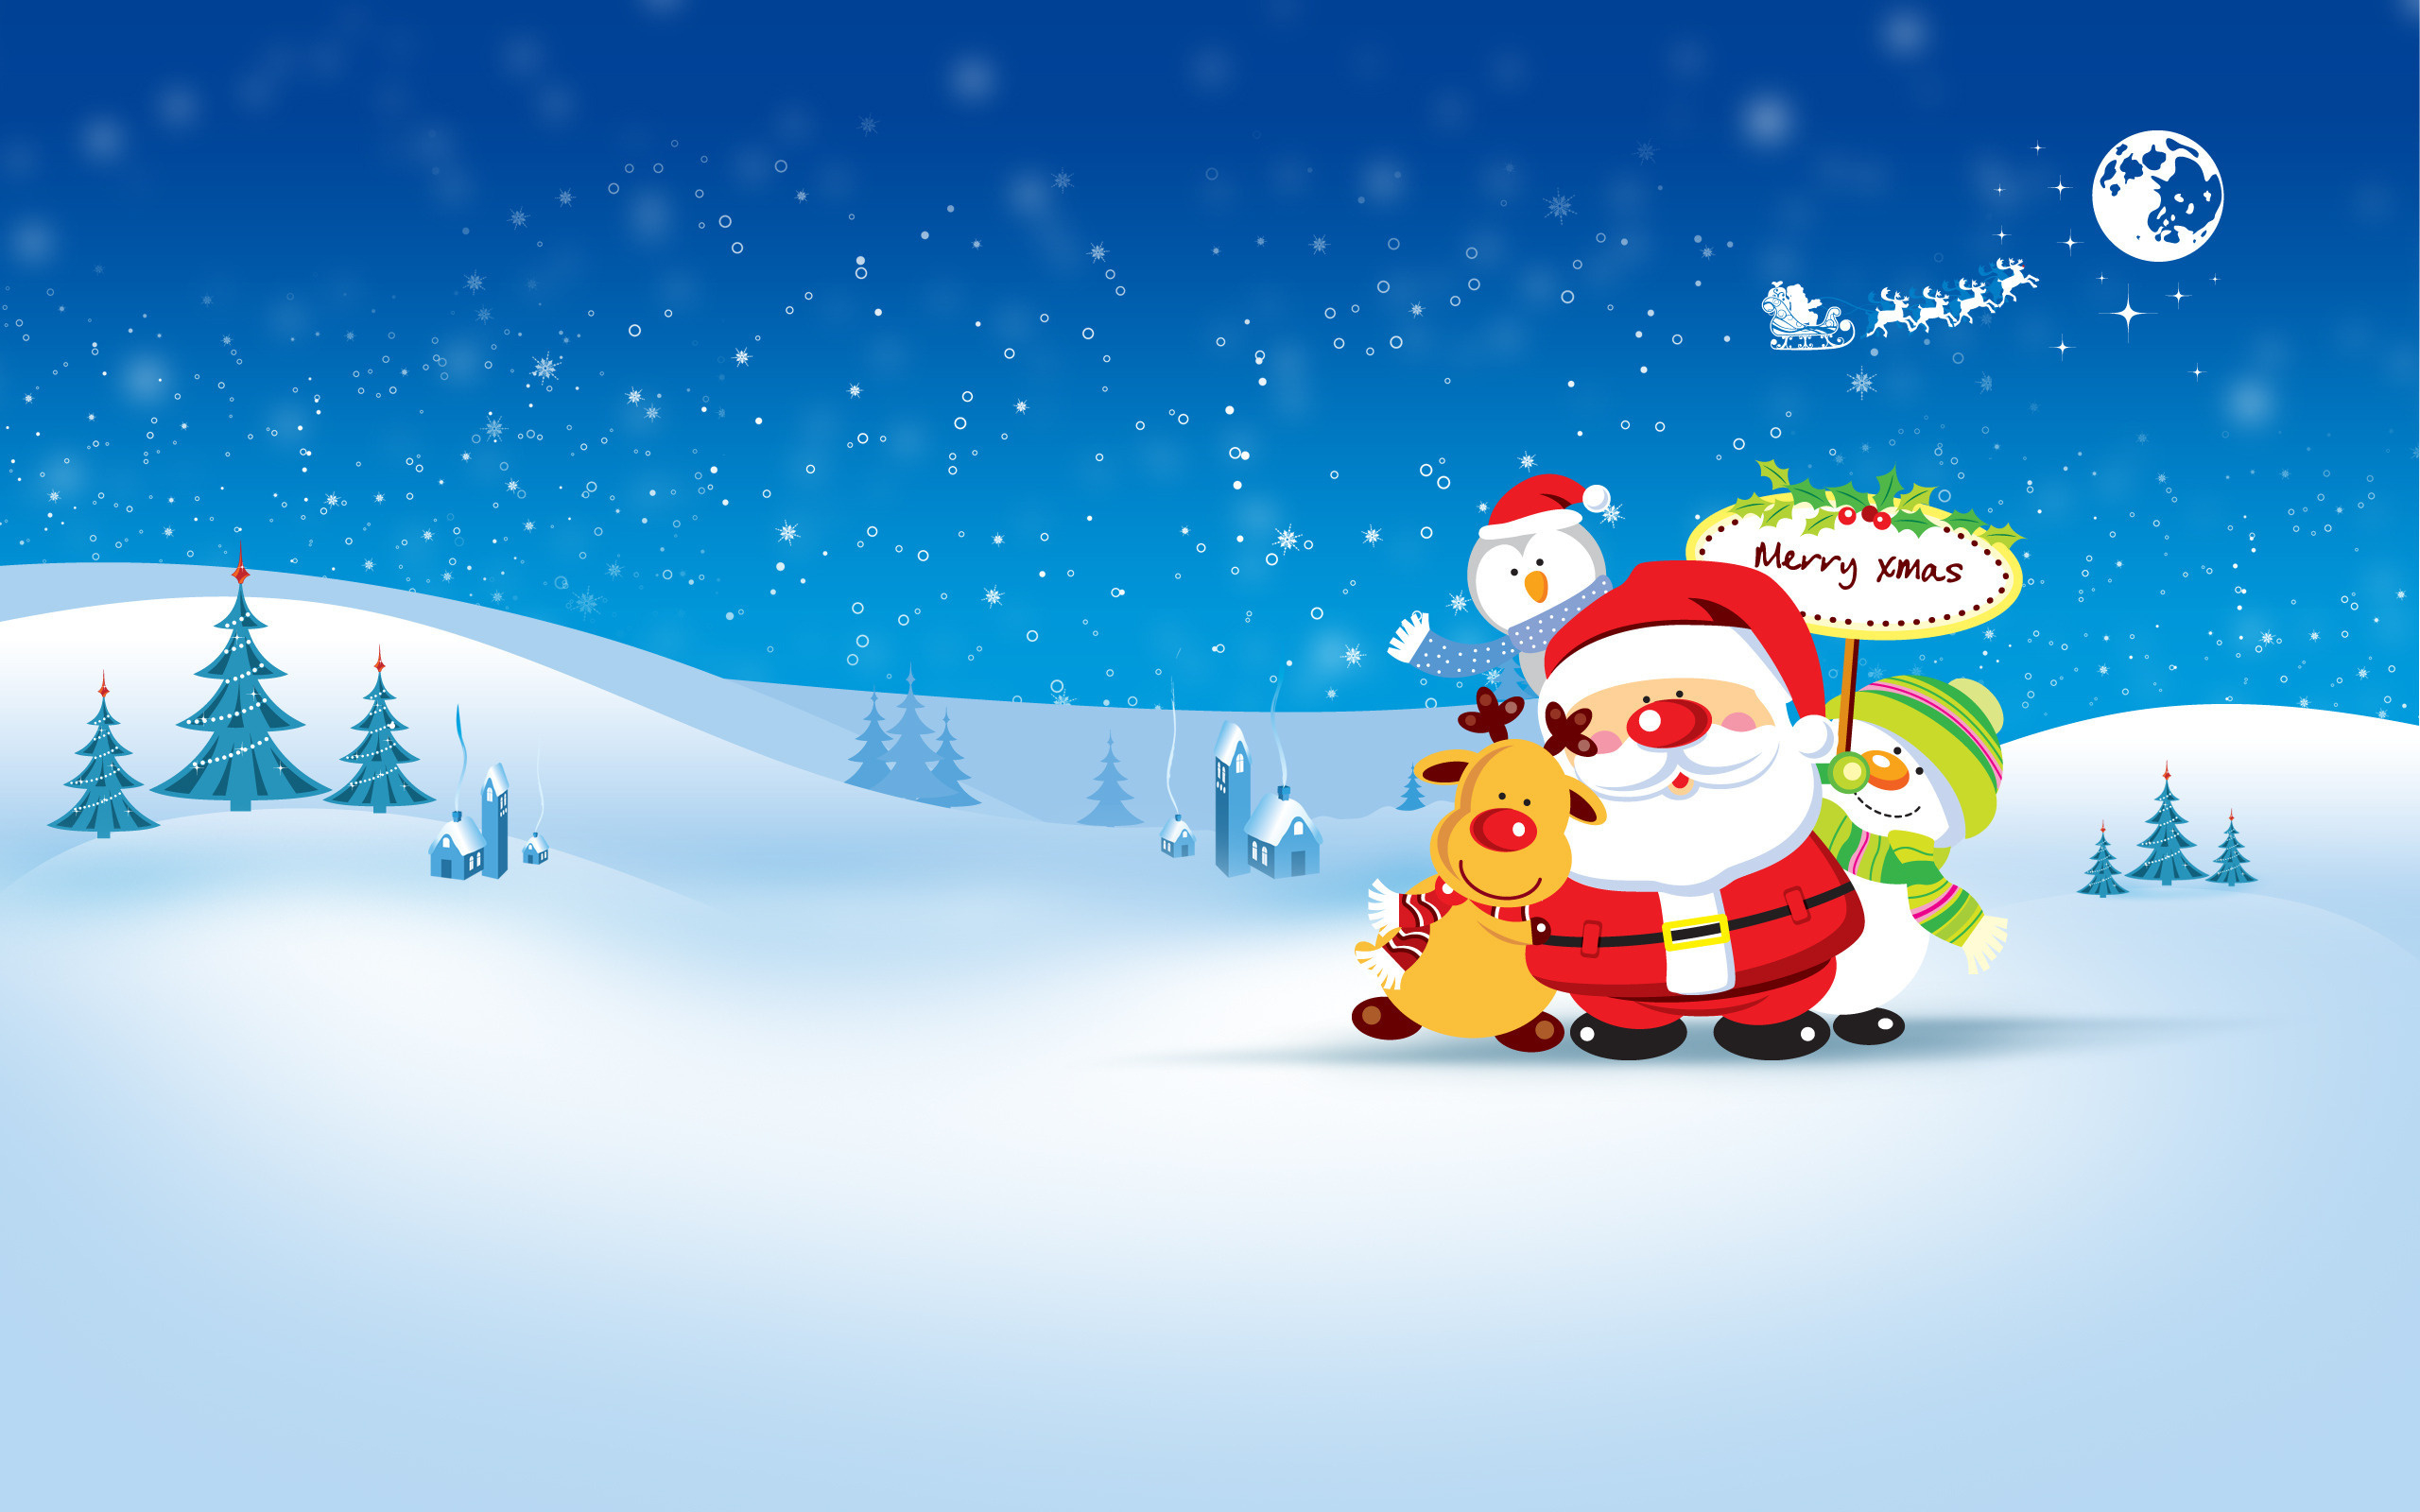 Merry Christmas Wallpaper And Image Pictures Photos